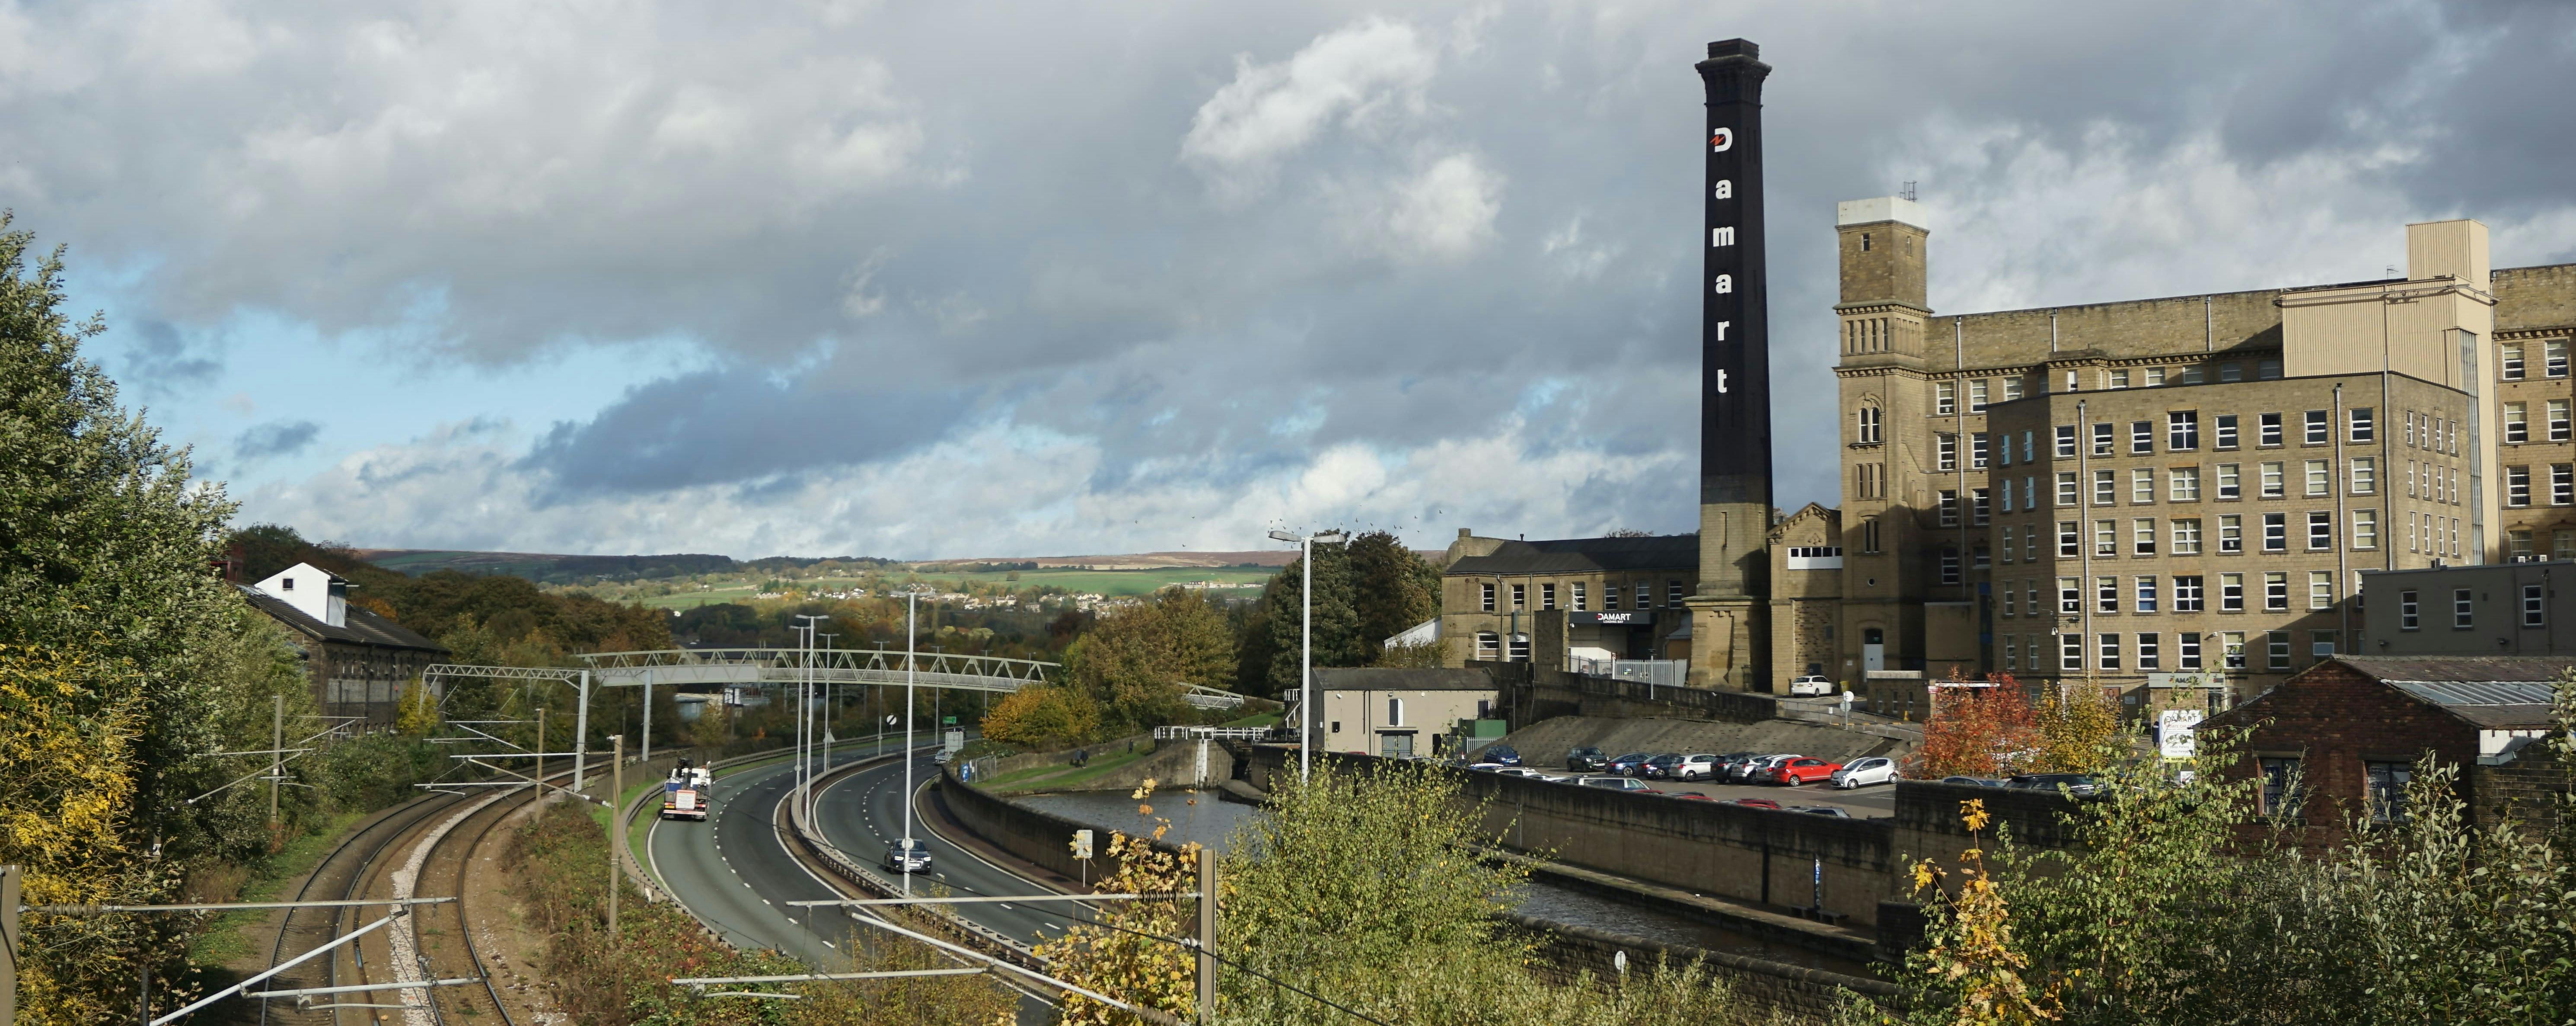 View of the railway, road and canal at Bingley